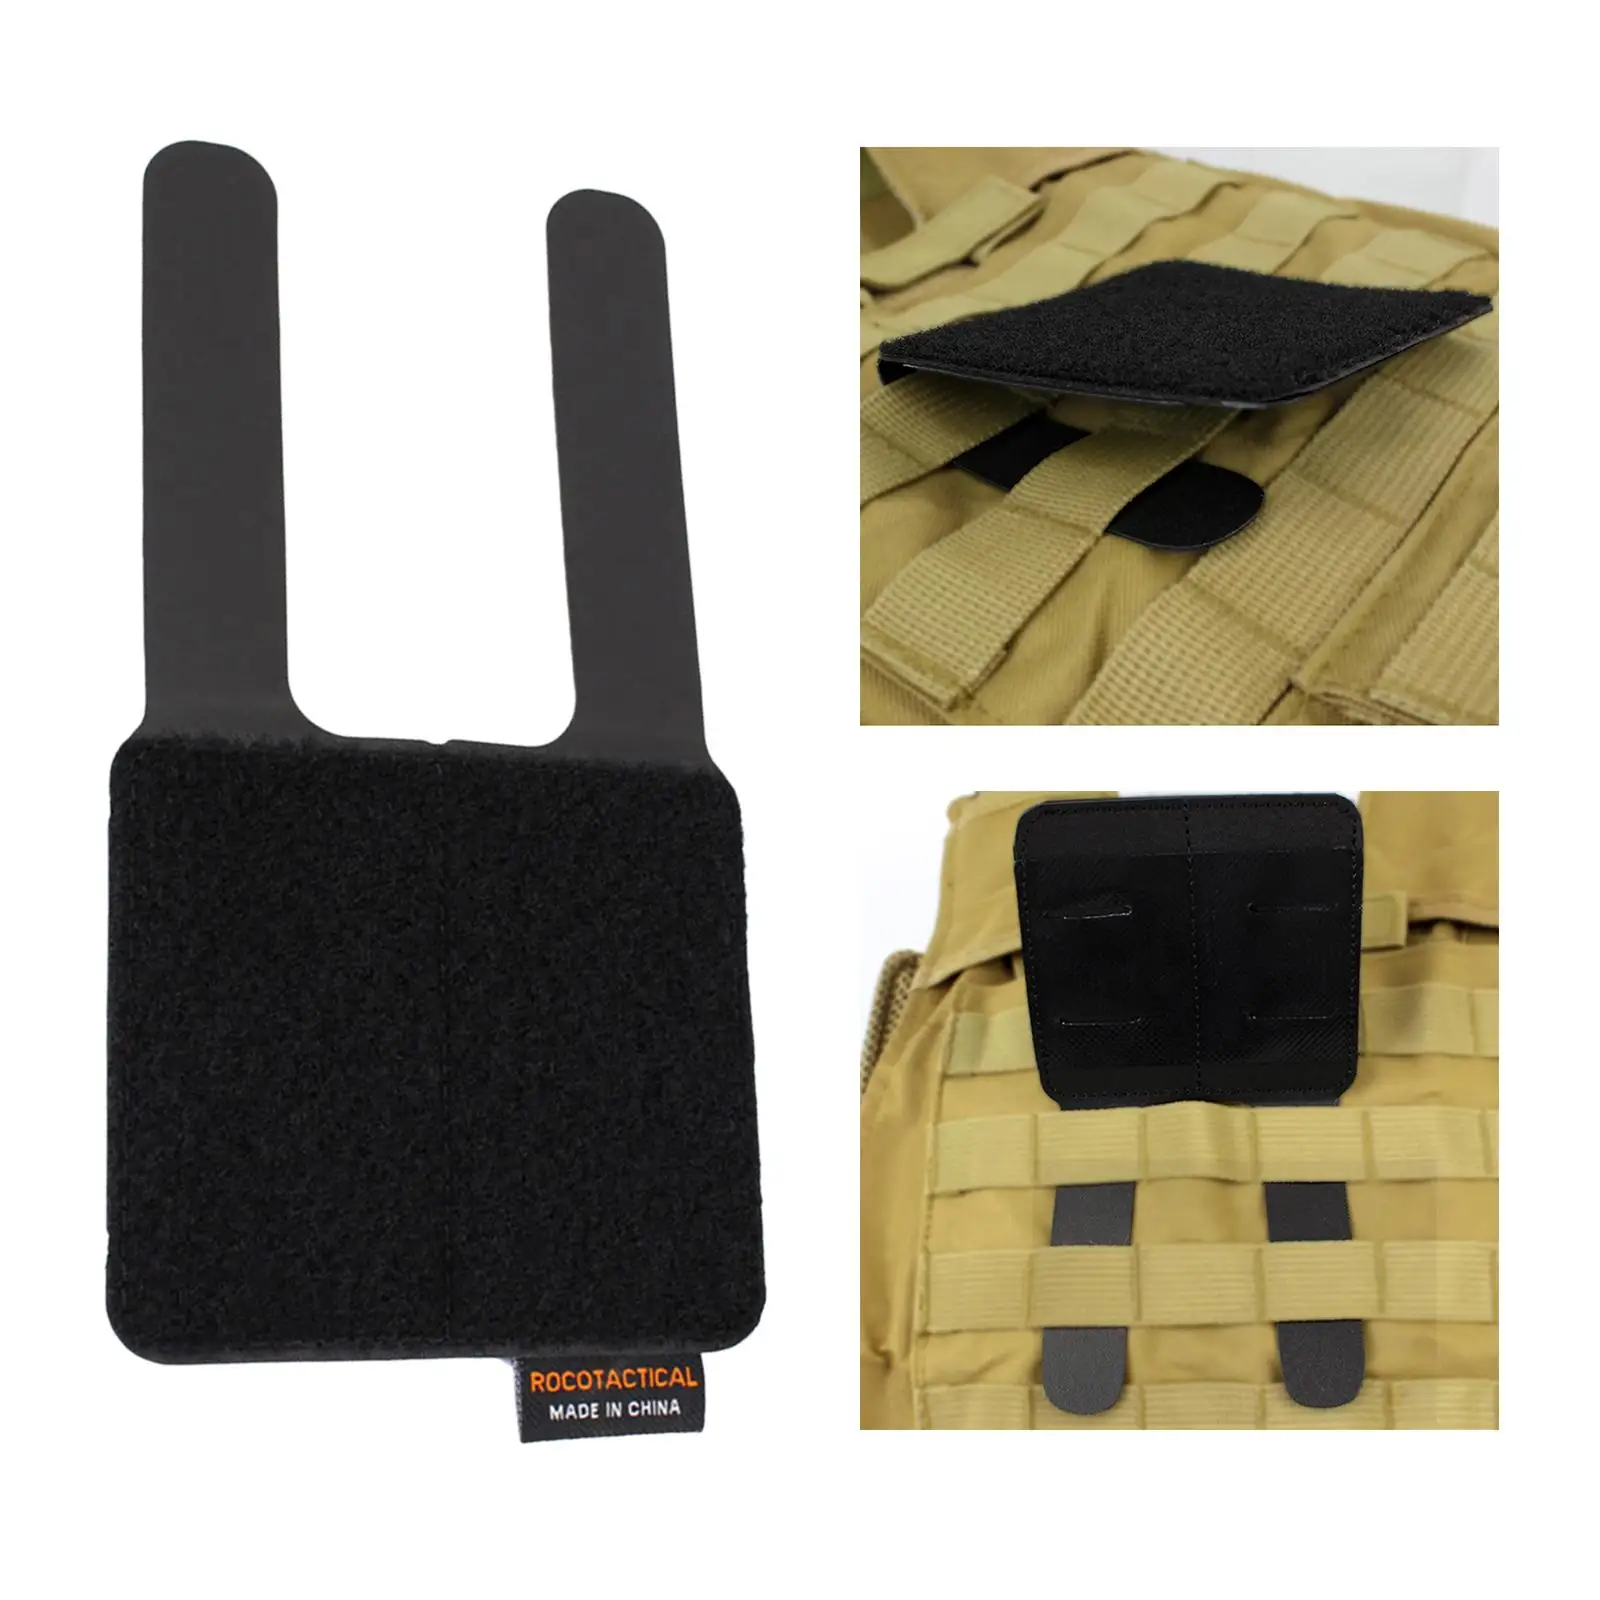  Board Badge Pad Backpacks Nylon Clothes Molle System Attachment